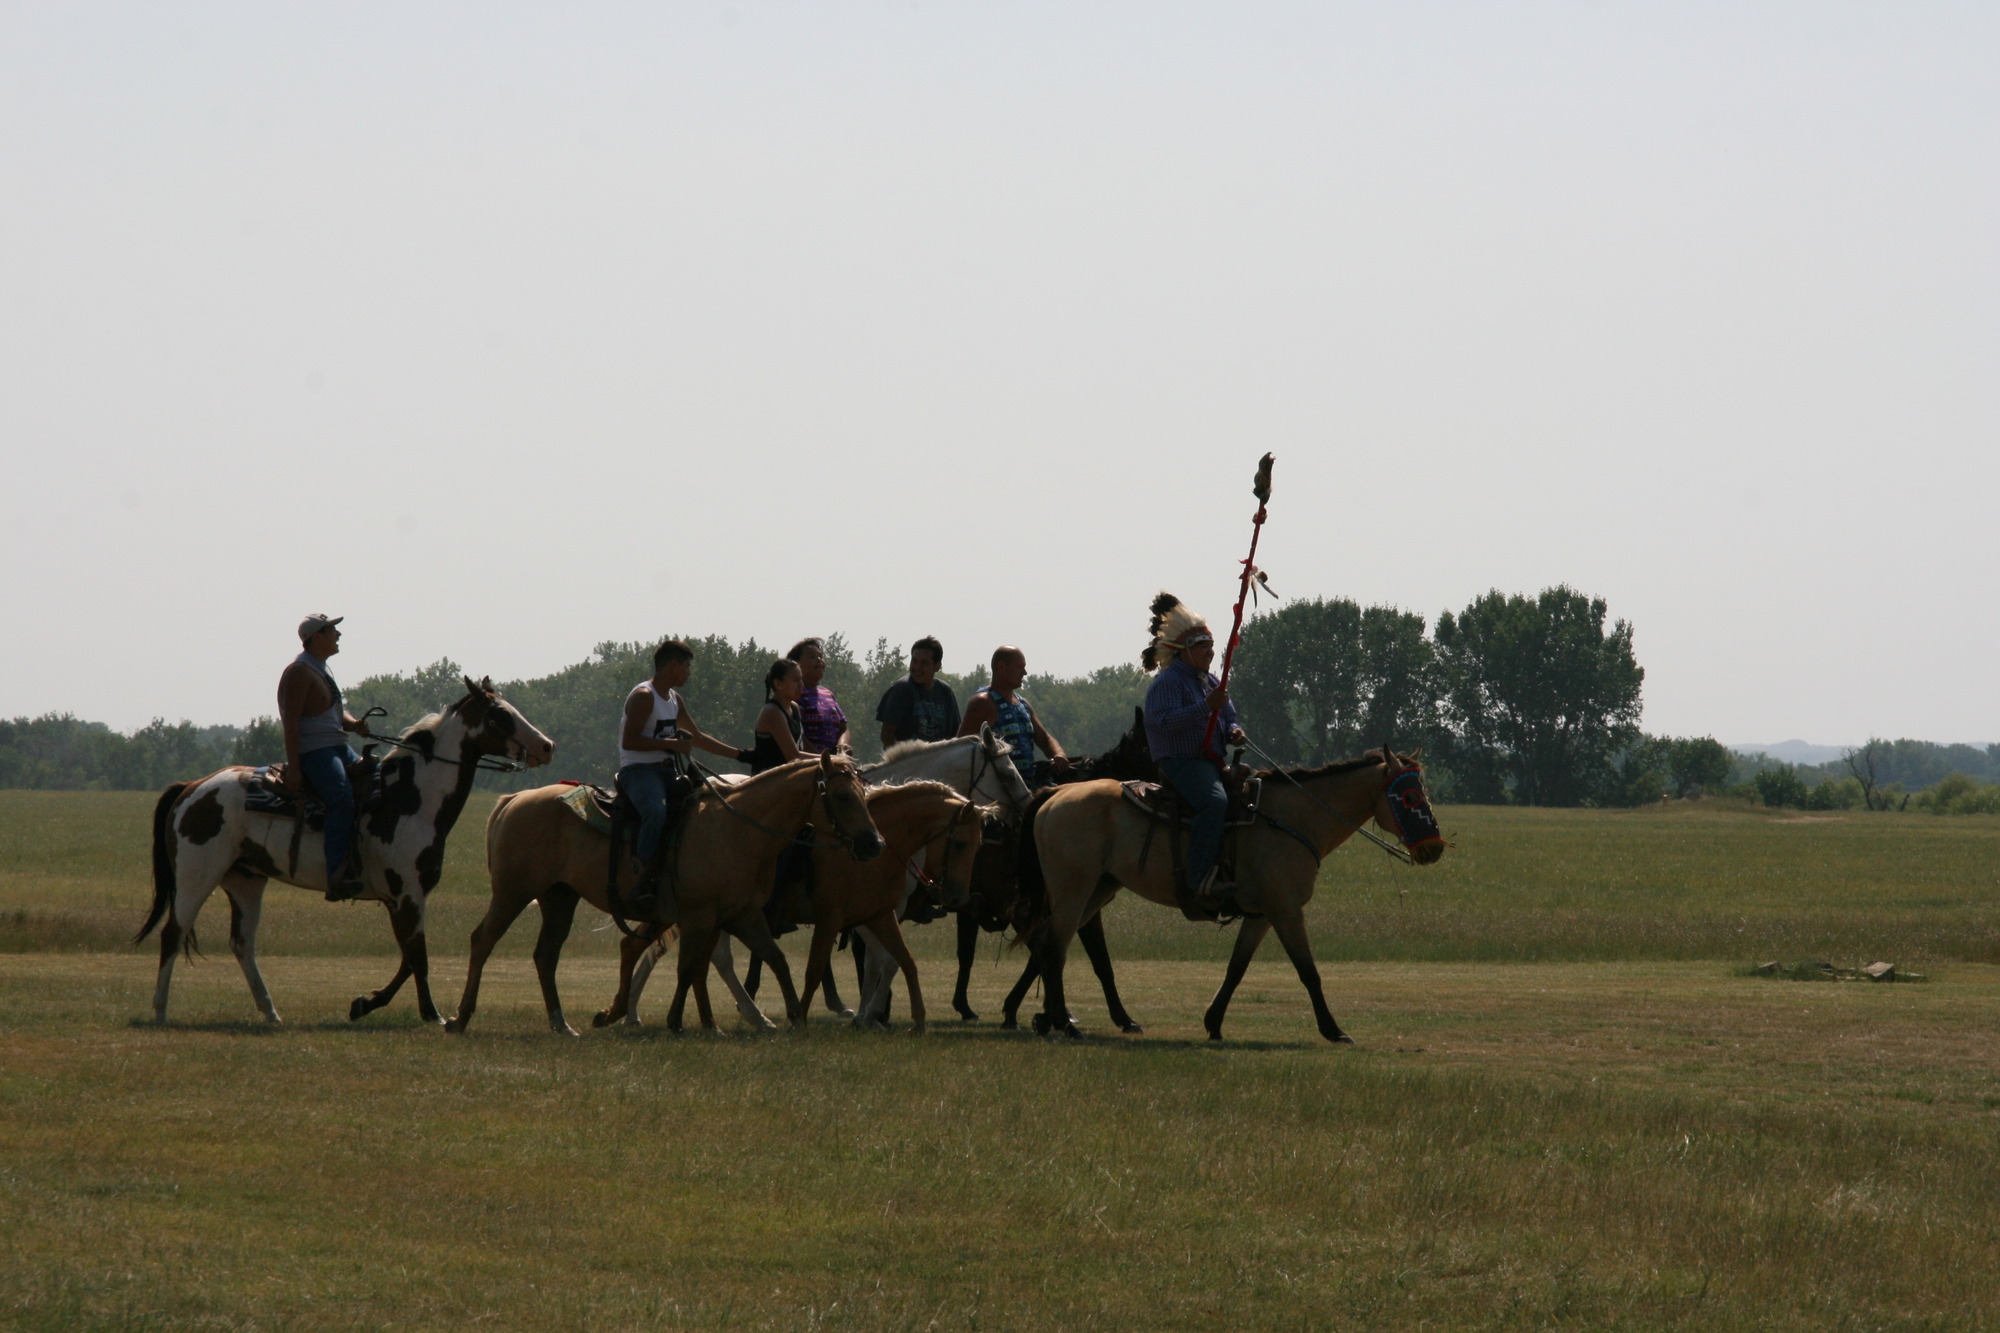 Several American Indian men riding horses through a grassy field